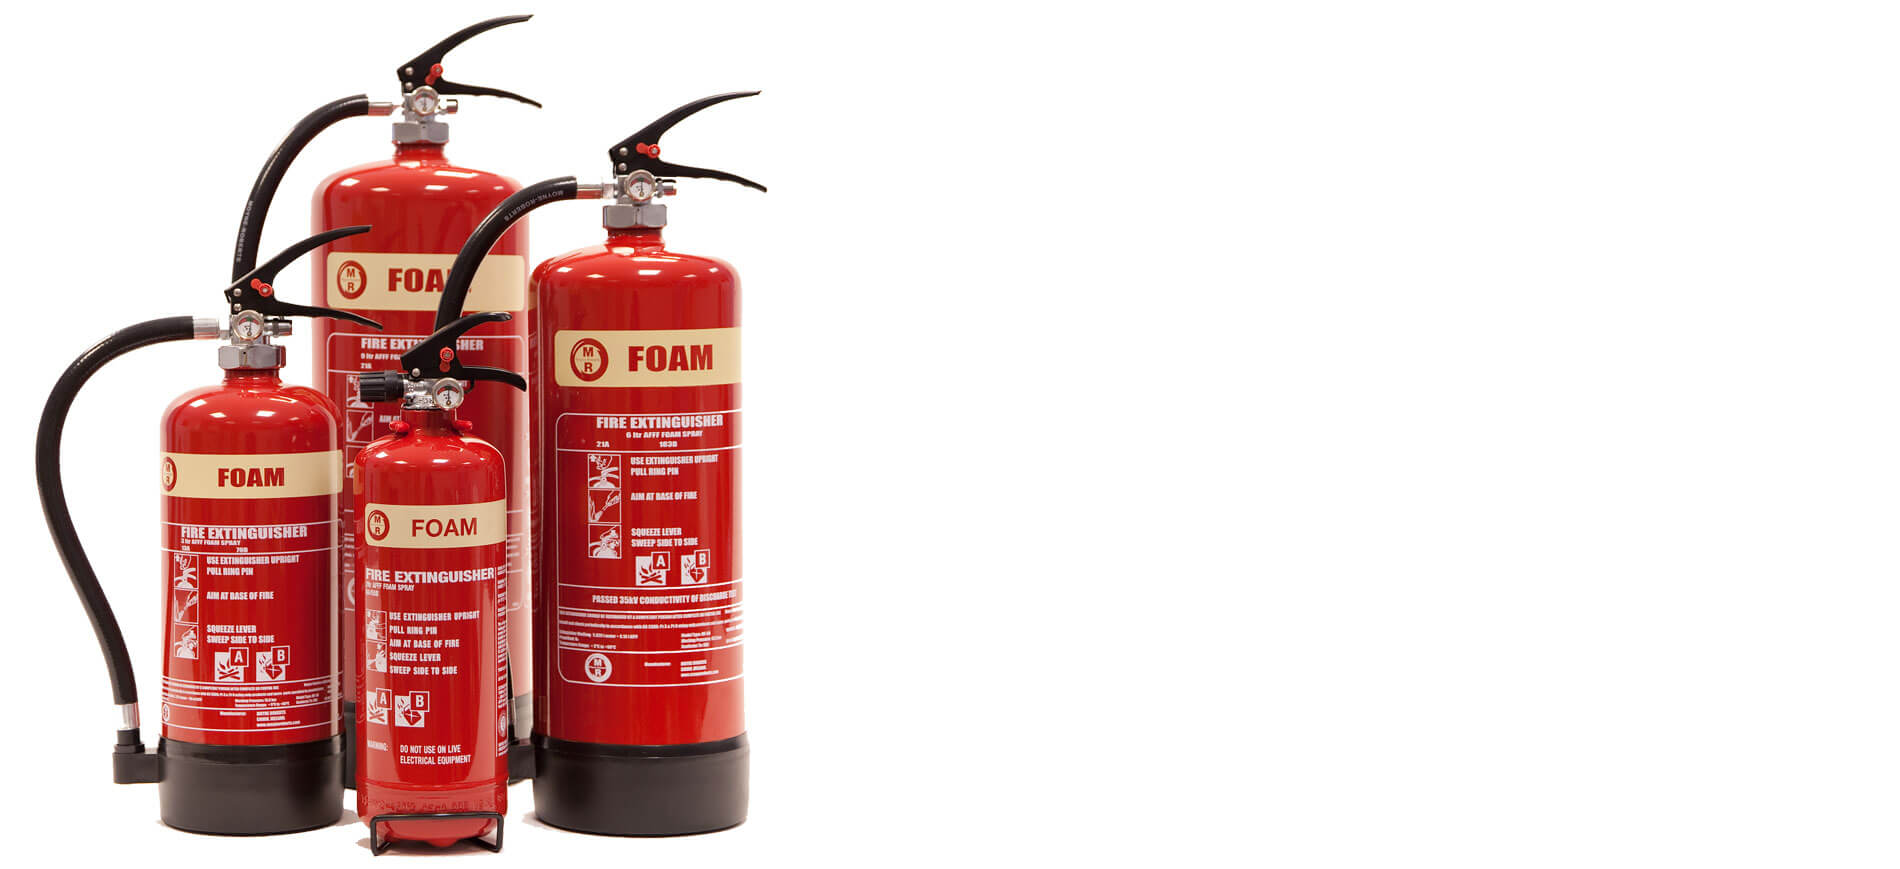 How To Use A Foam Fire Extinguisher